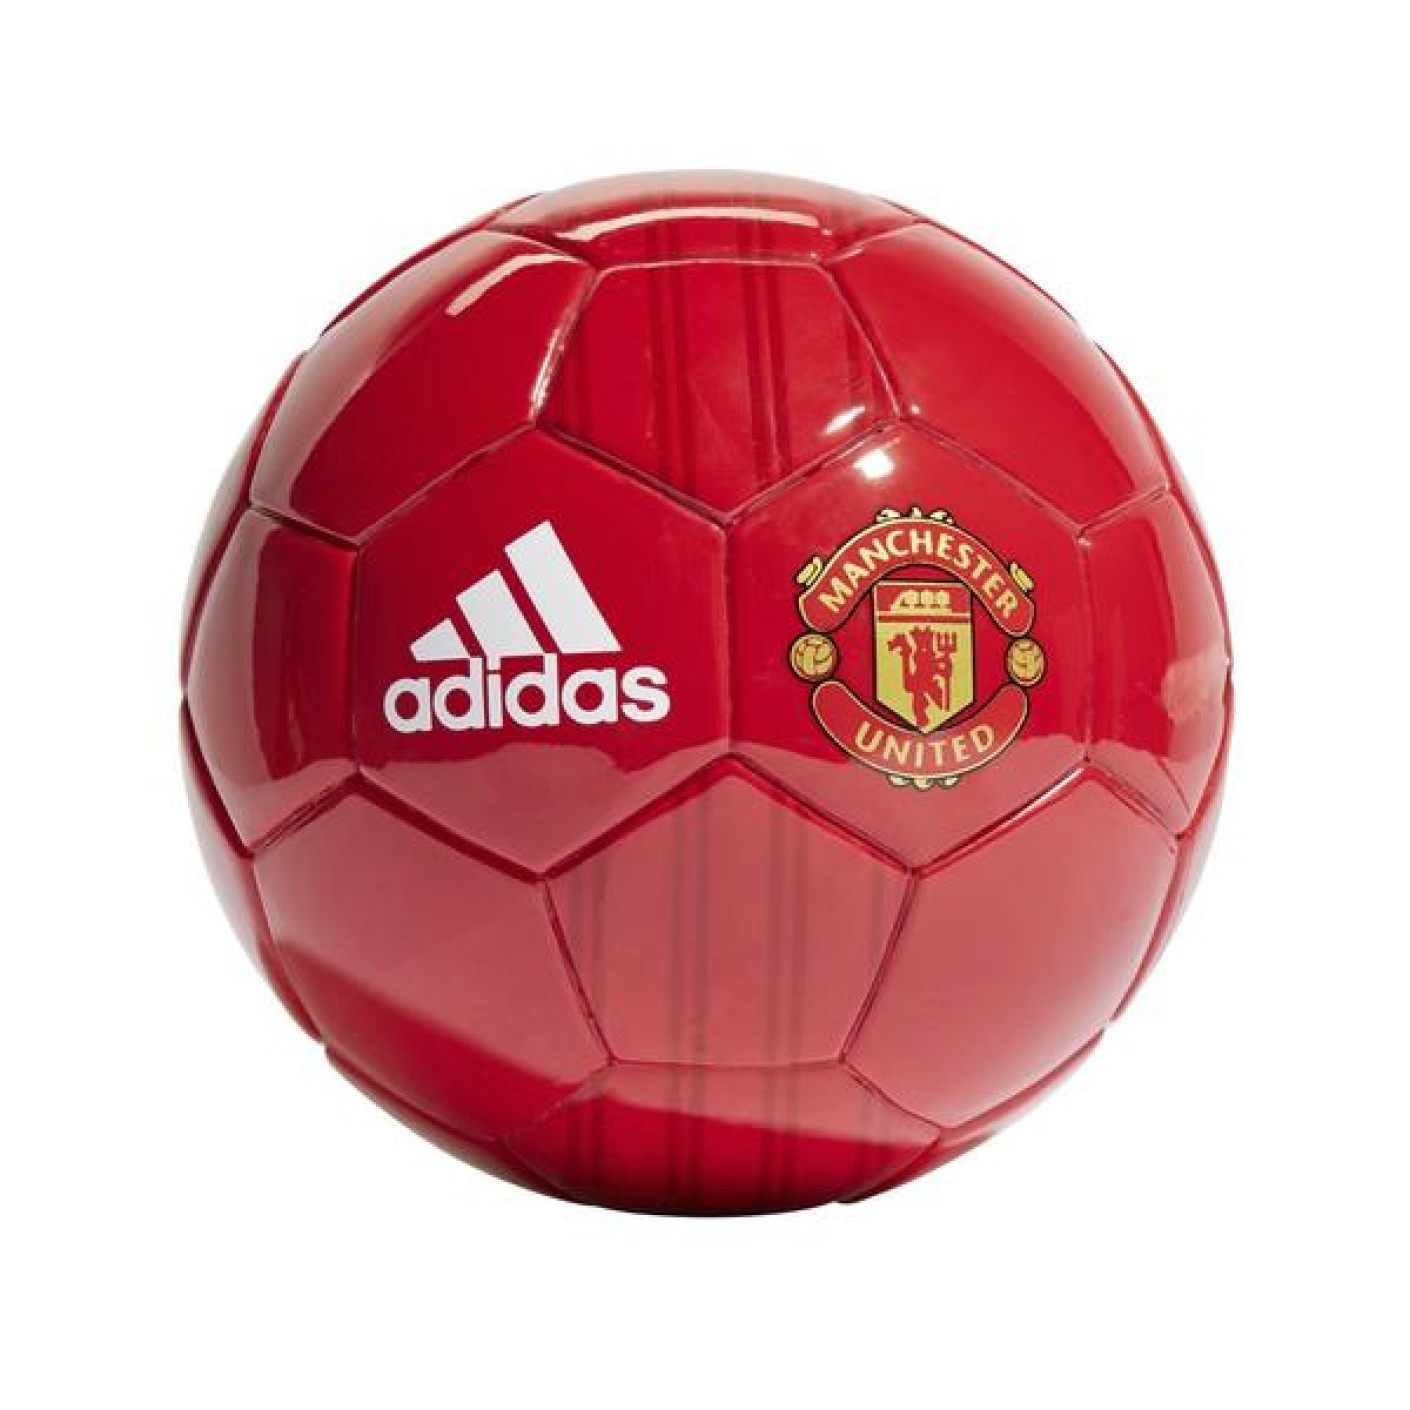 adidas Manchester United Mini Voetbal Maat 1 Rood Goud